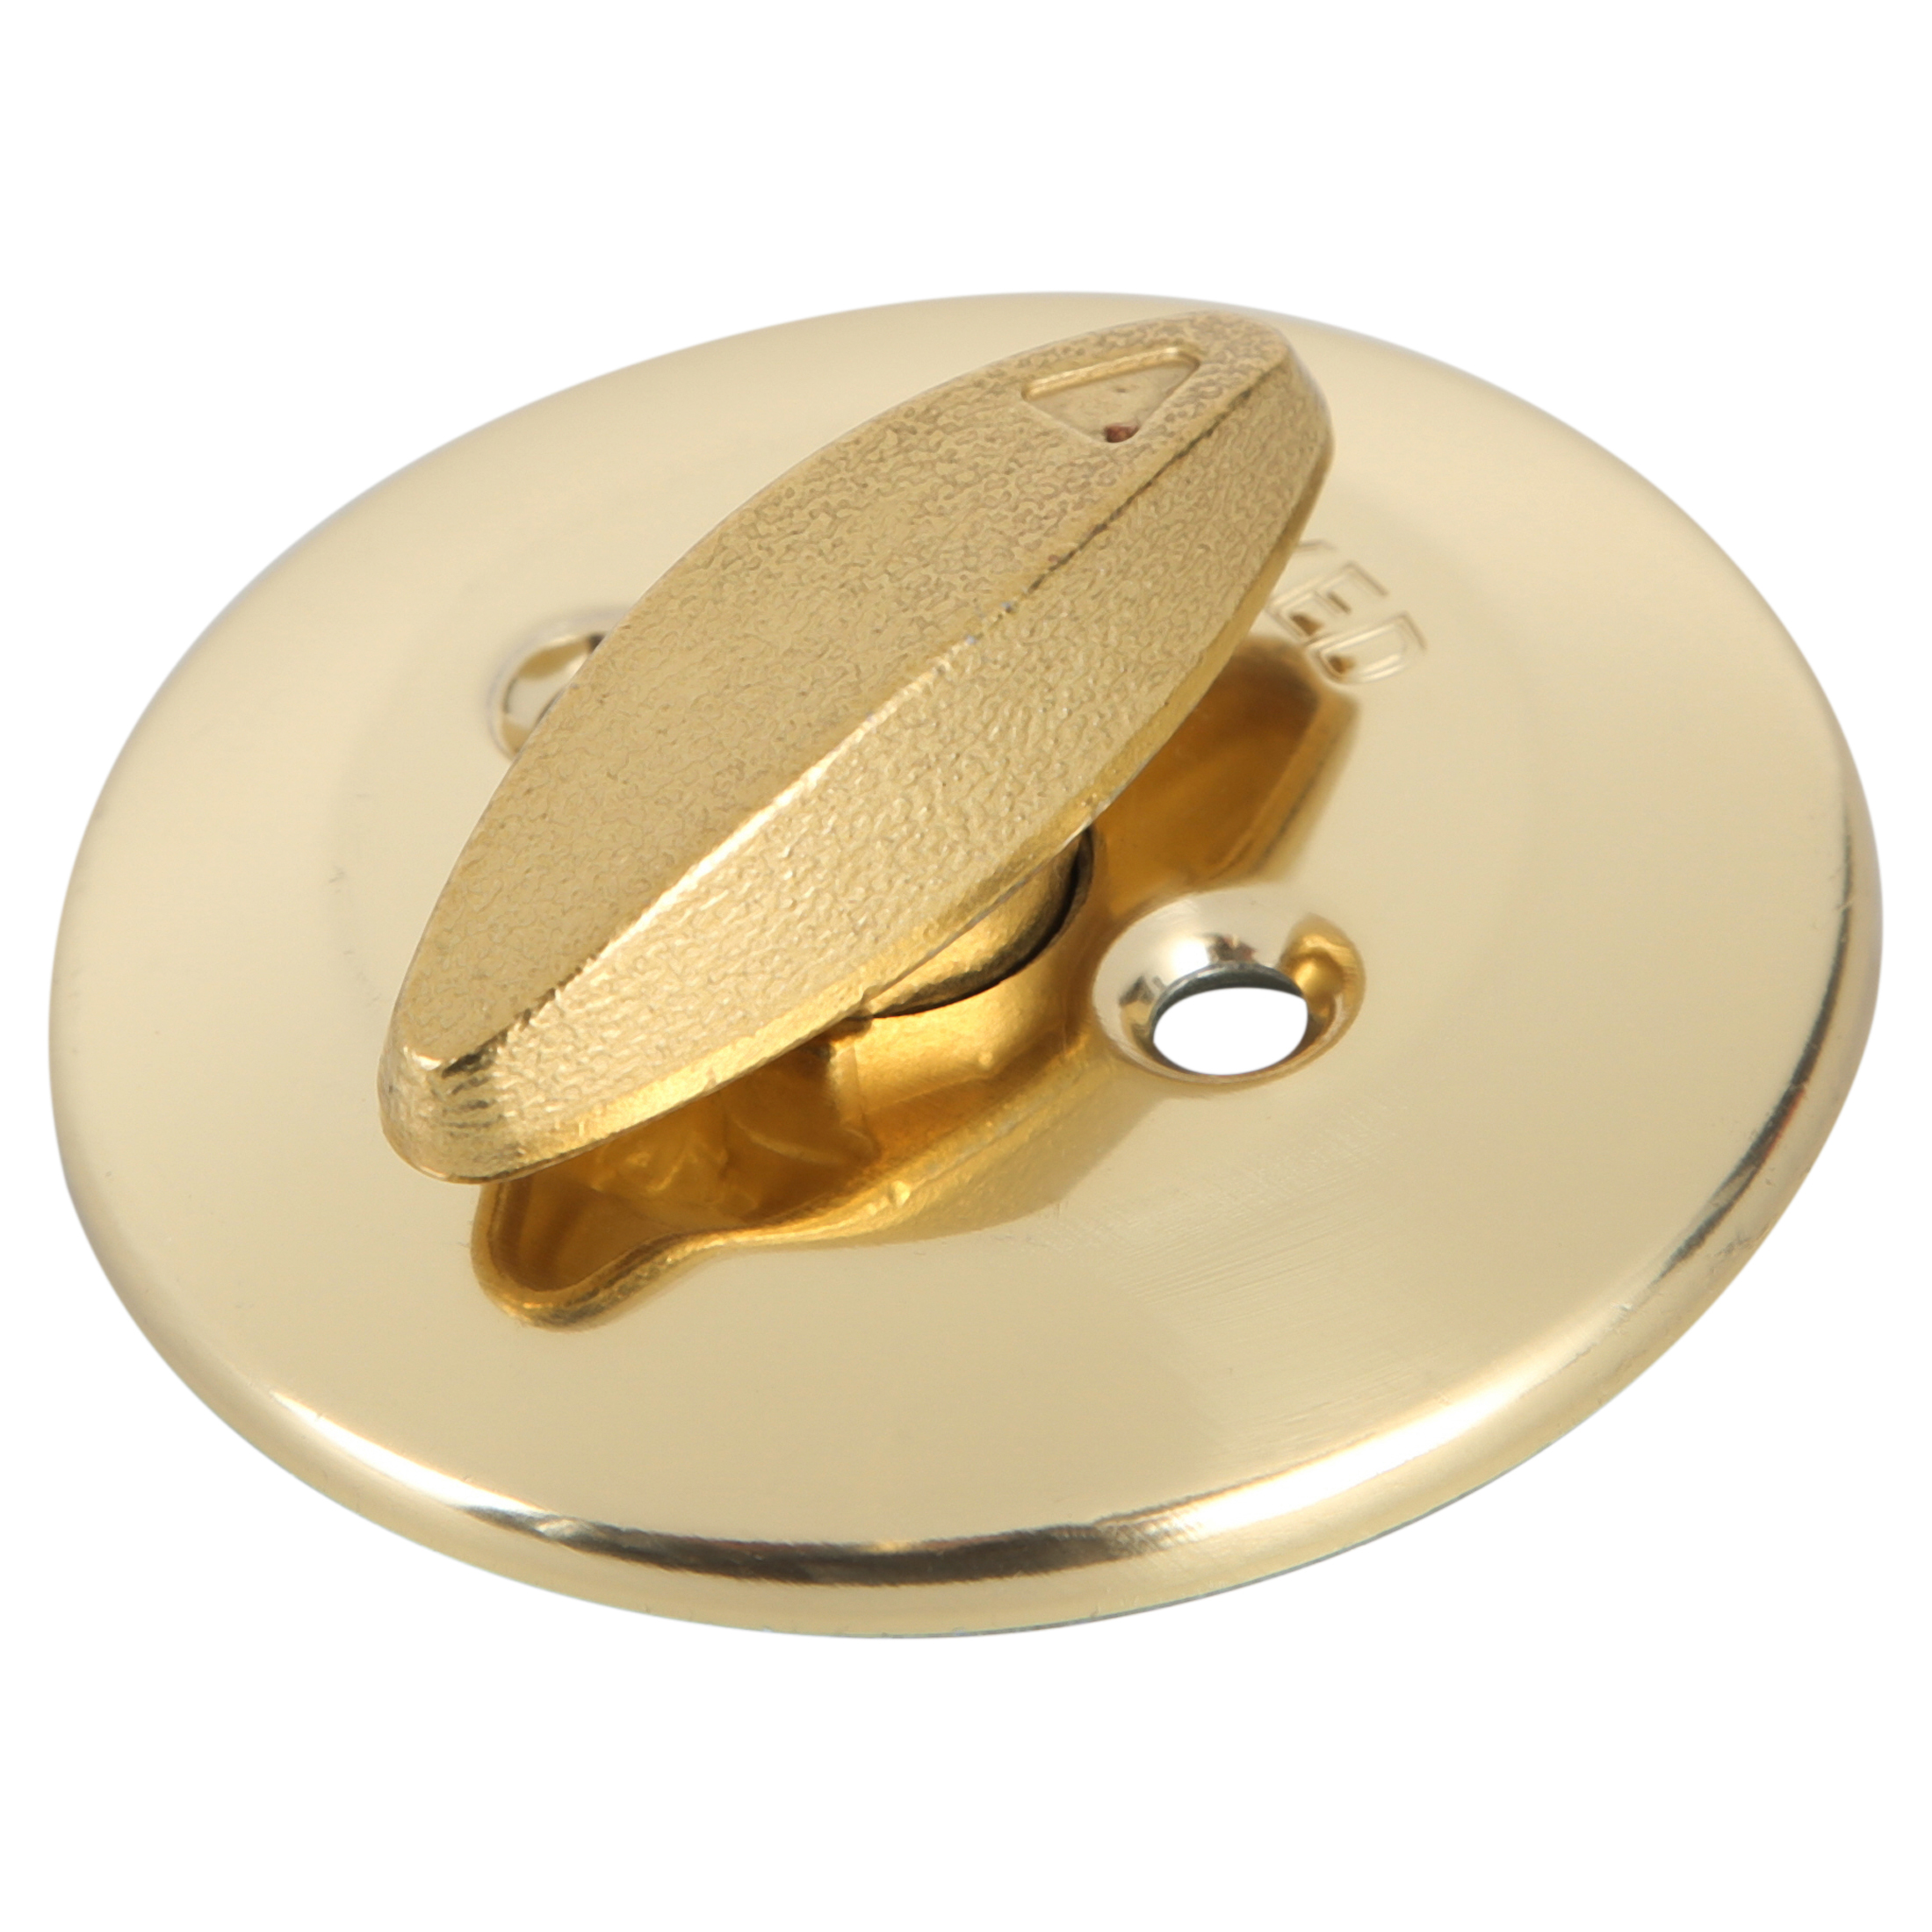 Kwikset 242 Tylo Entry Knob and Single Cylinder Deadbolt Project Pack in Antique Brass by Kwikset - 1